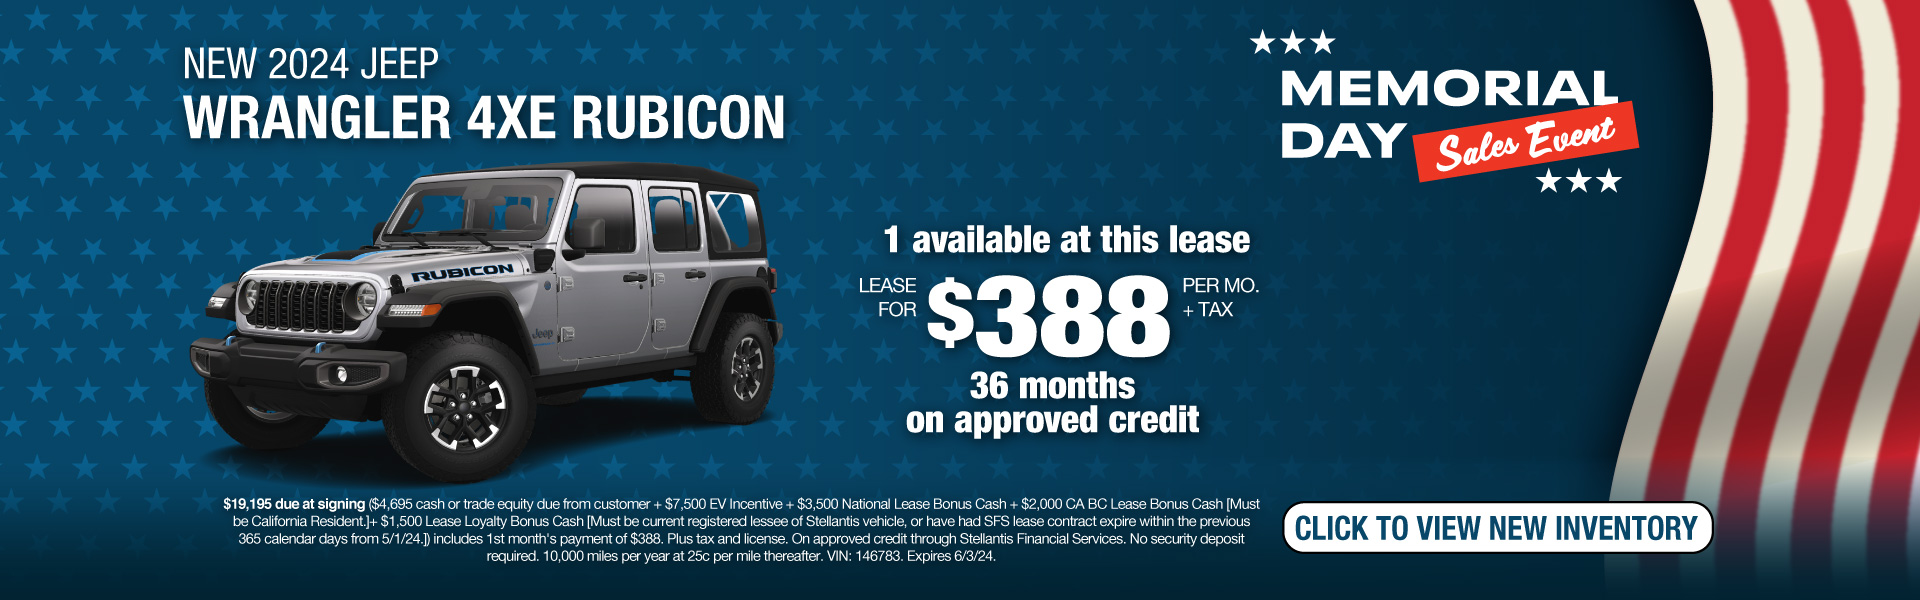 Lease a New 2024 Jeep Wrangler 4xe Sport S for $388 per month plus tax. Expires 6/3/24.